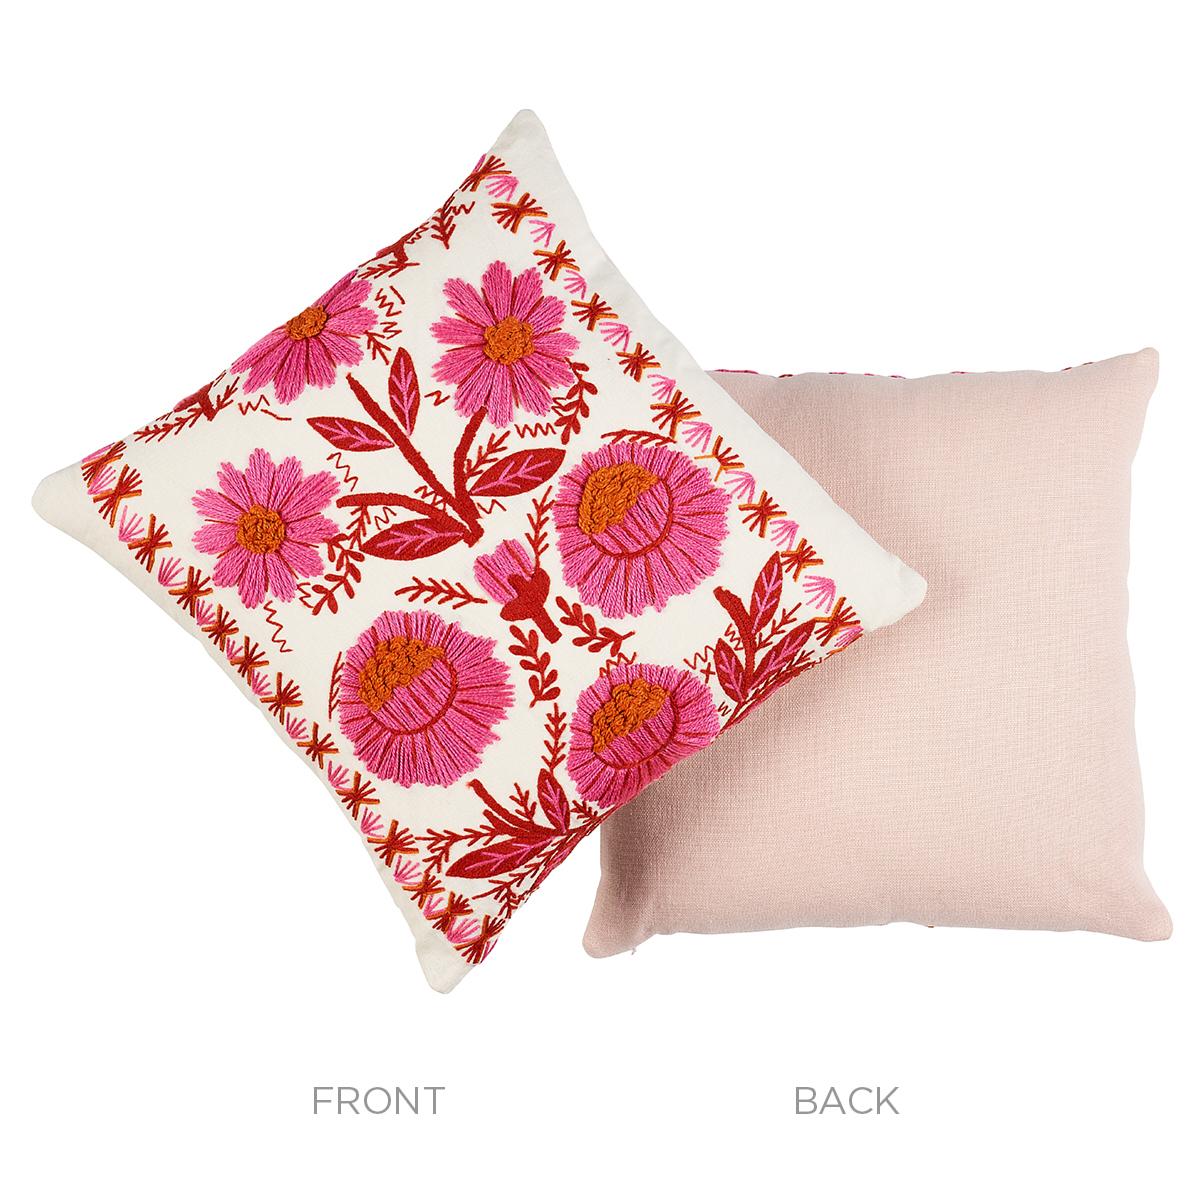 Marguerite Embroidery Pillow_BLOSSOM